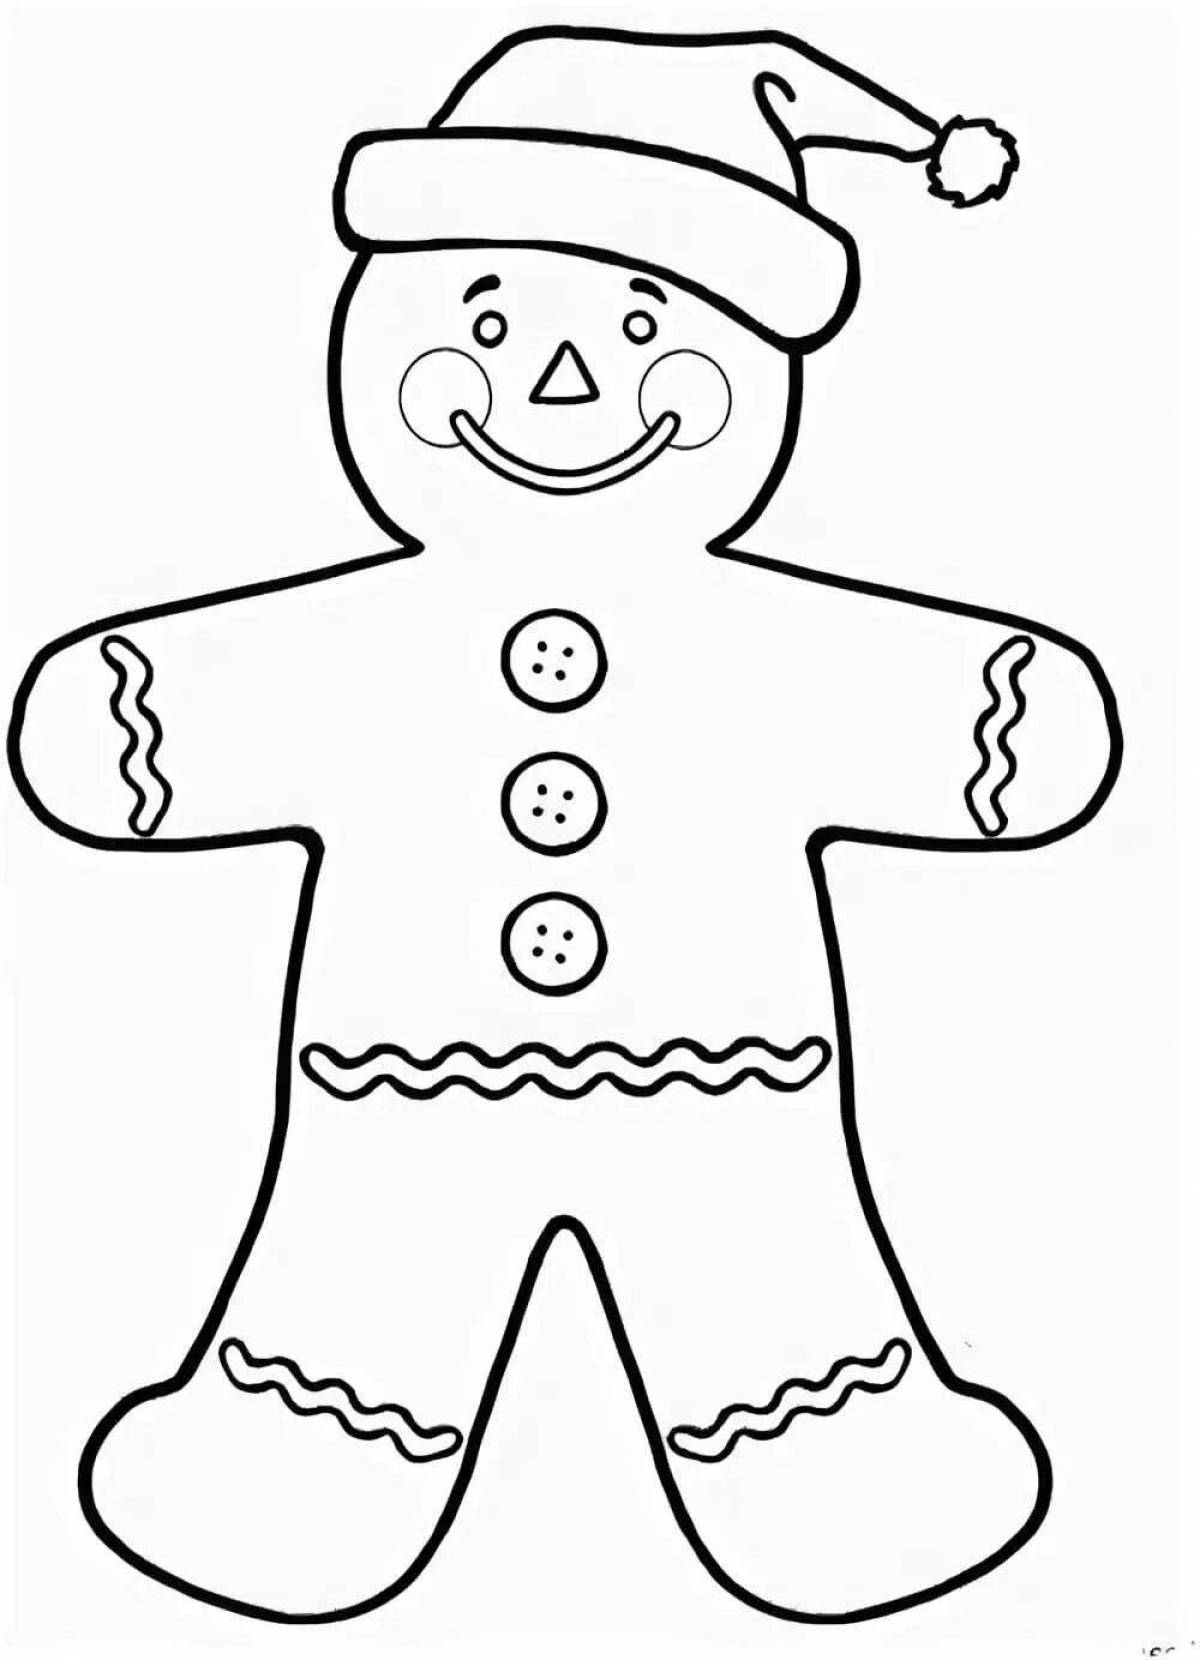 Colourful gingerbread man coloring book